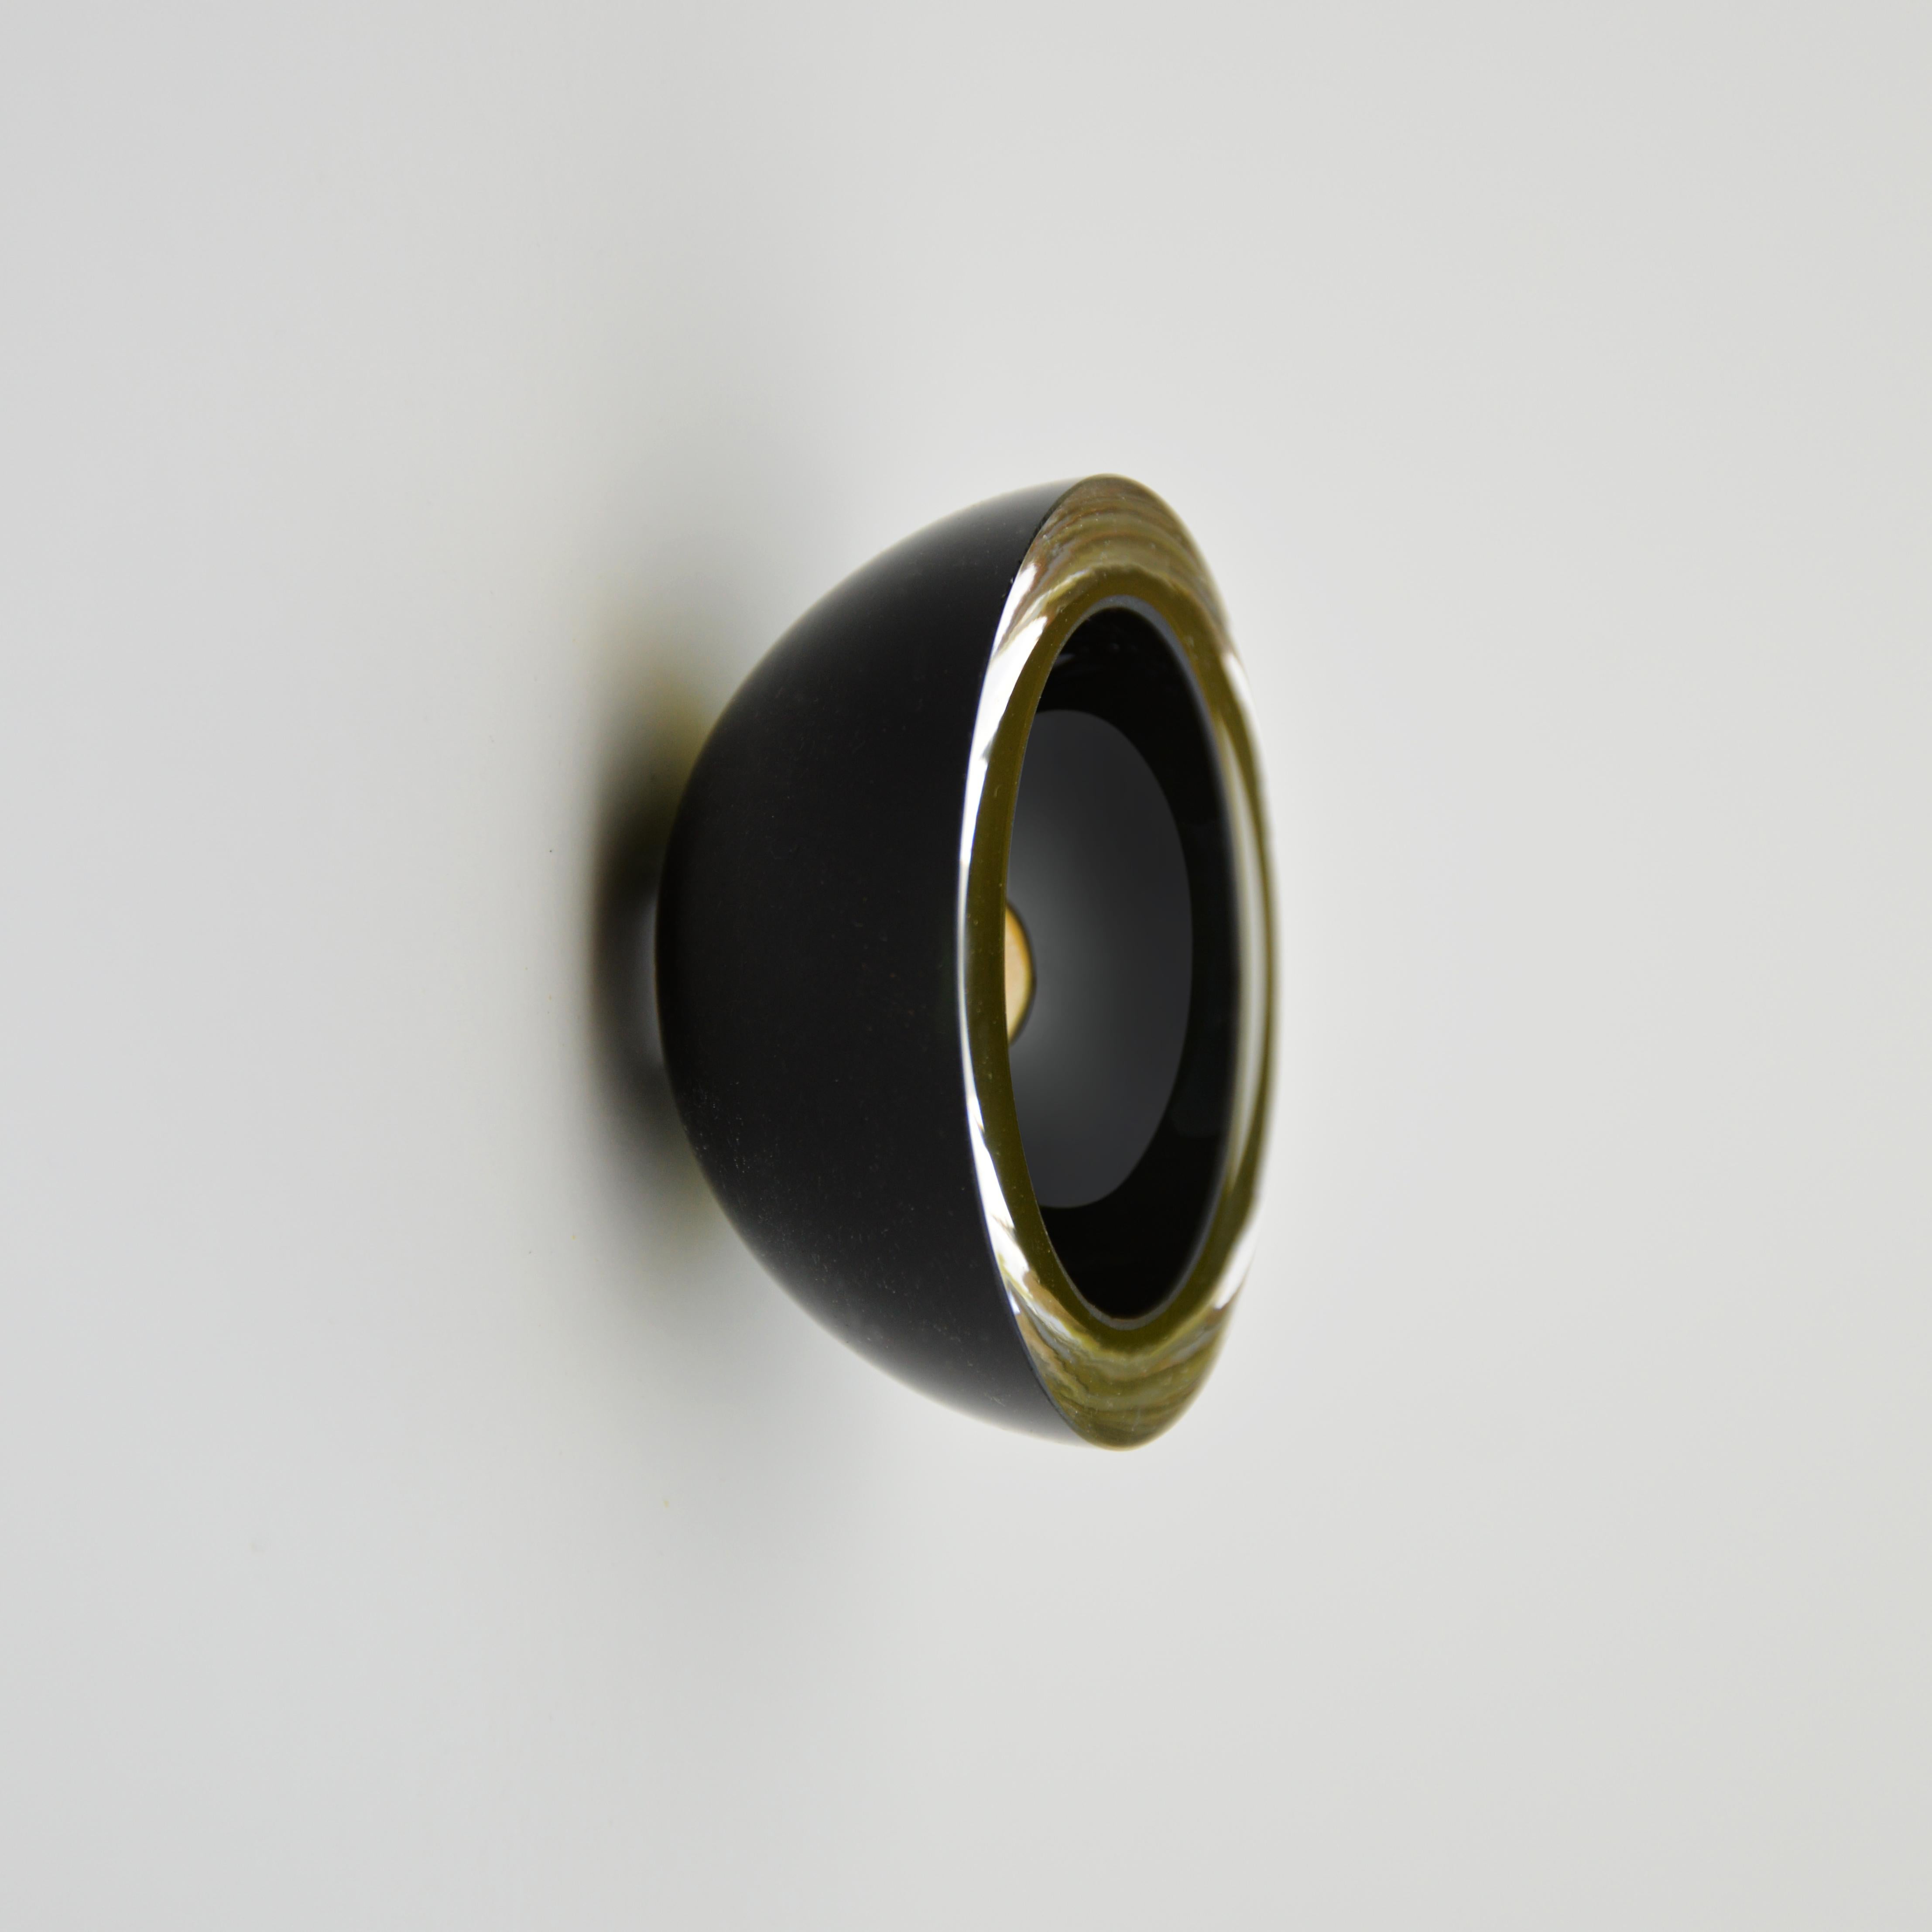 Other Unique Milan Cabinet Knob by Atelier George